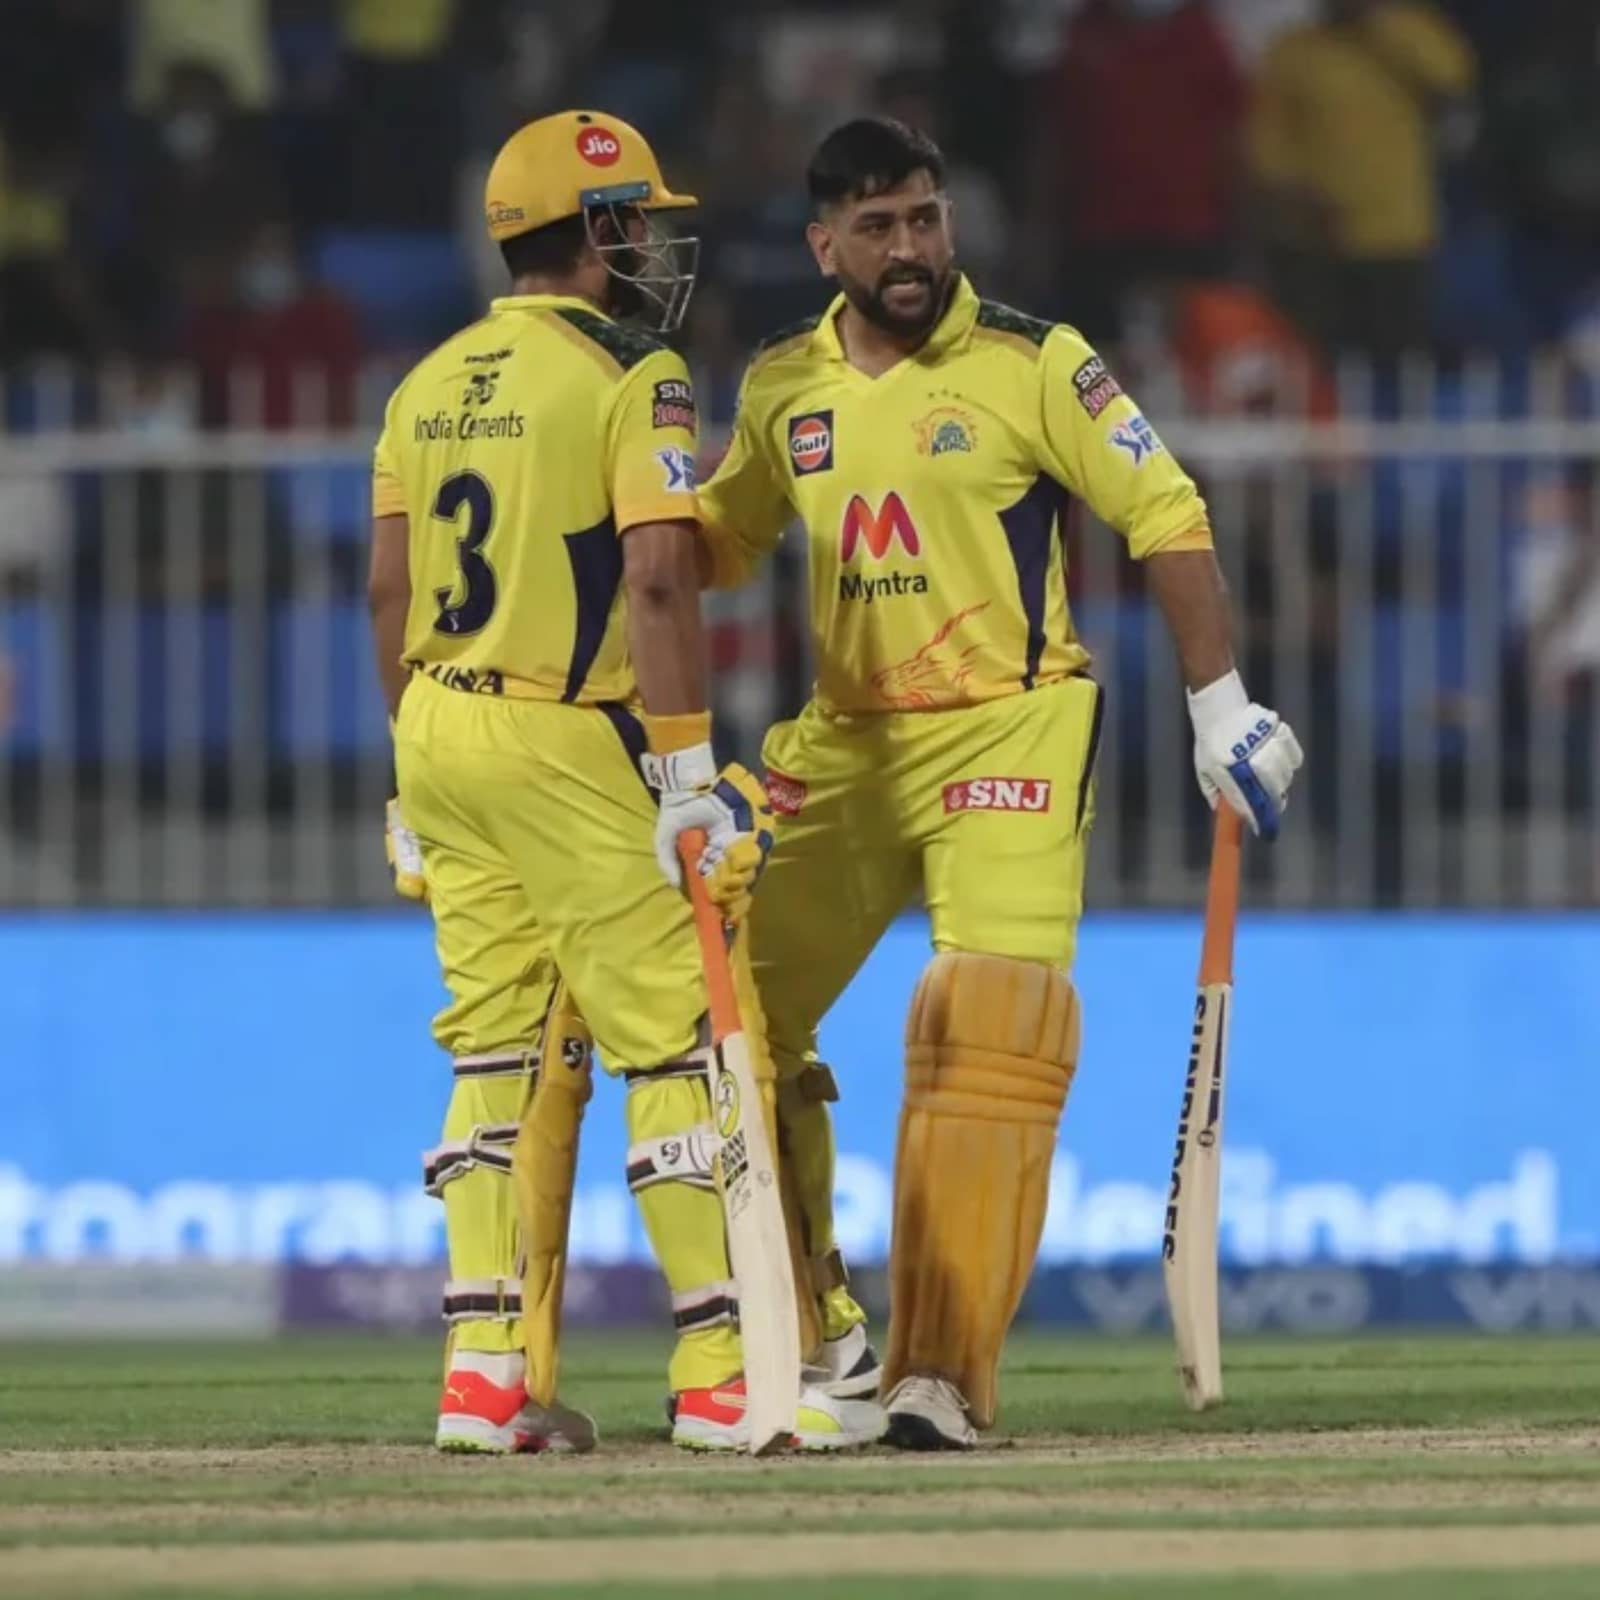 RCB vs CSK Highlights, IPL 2021, Todays Match Chennai Super Kings Beat Royal Challengers Bangalore by Six Wickets to Reclaim Top Spot